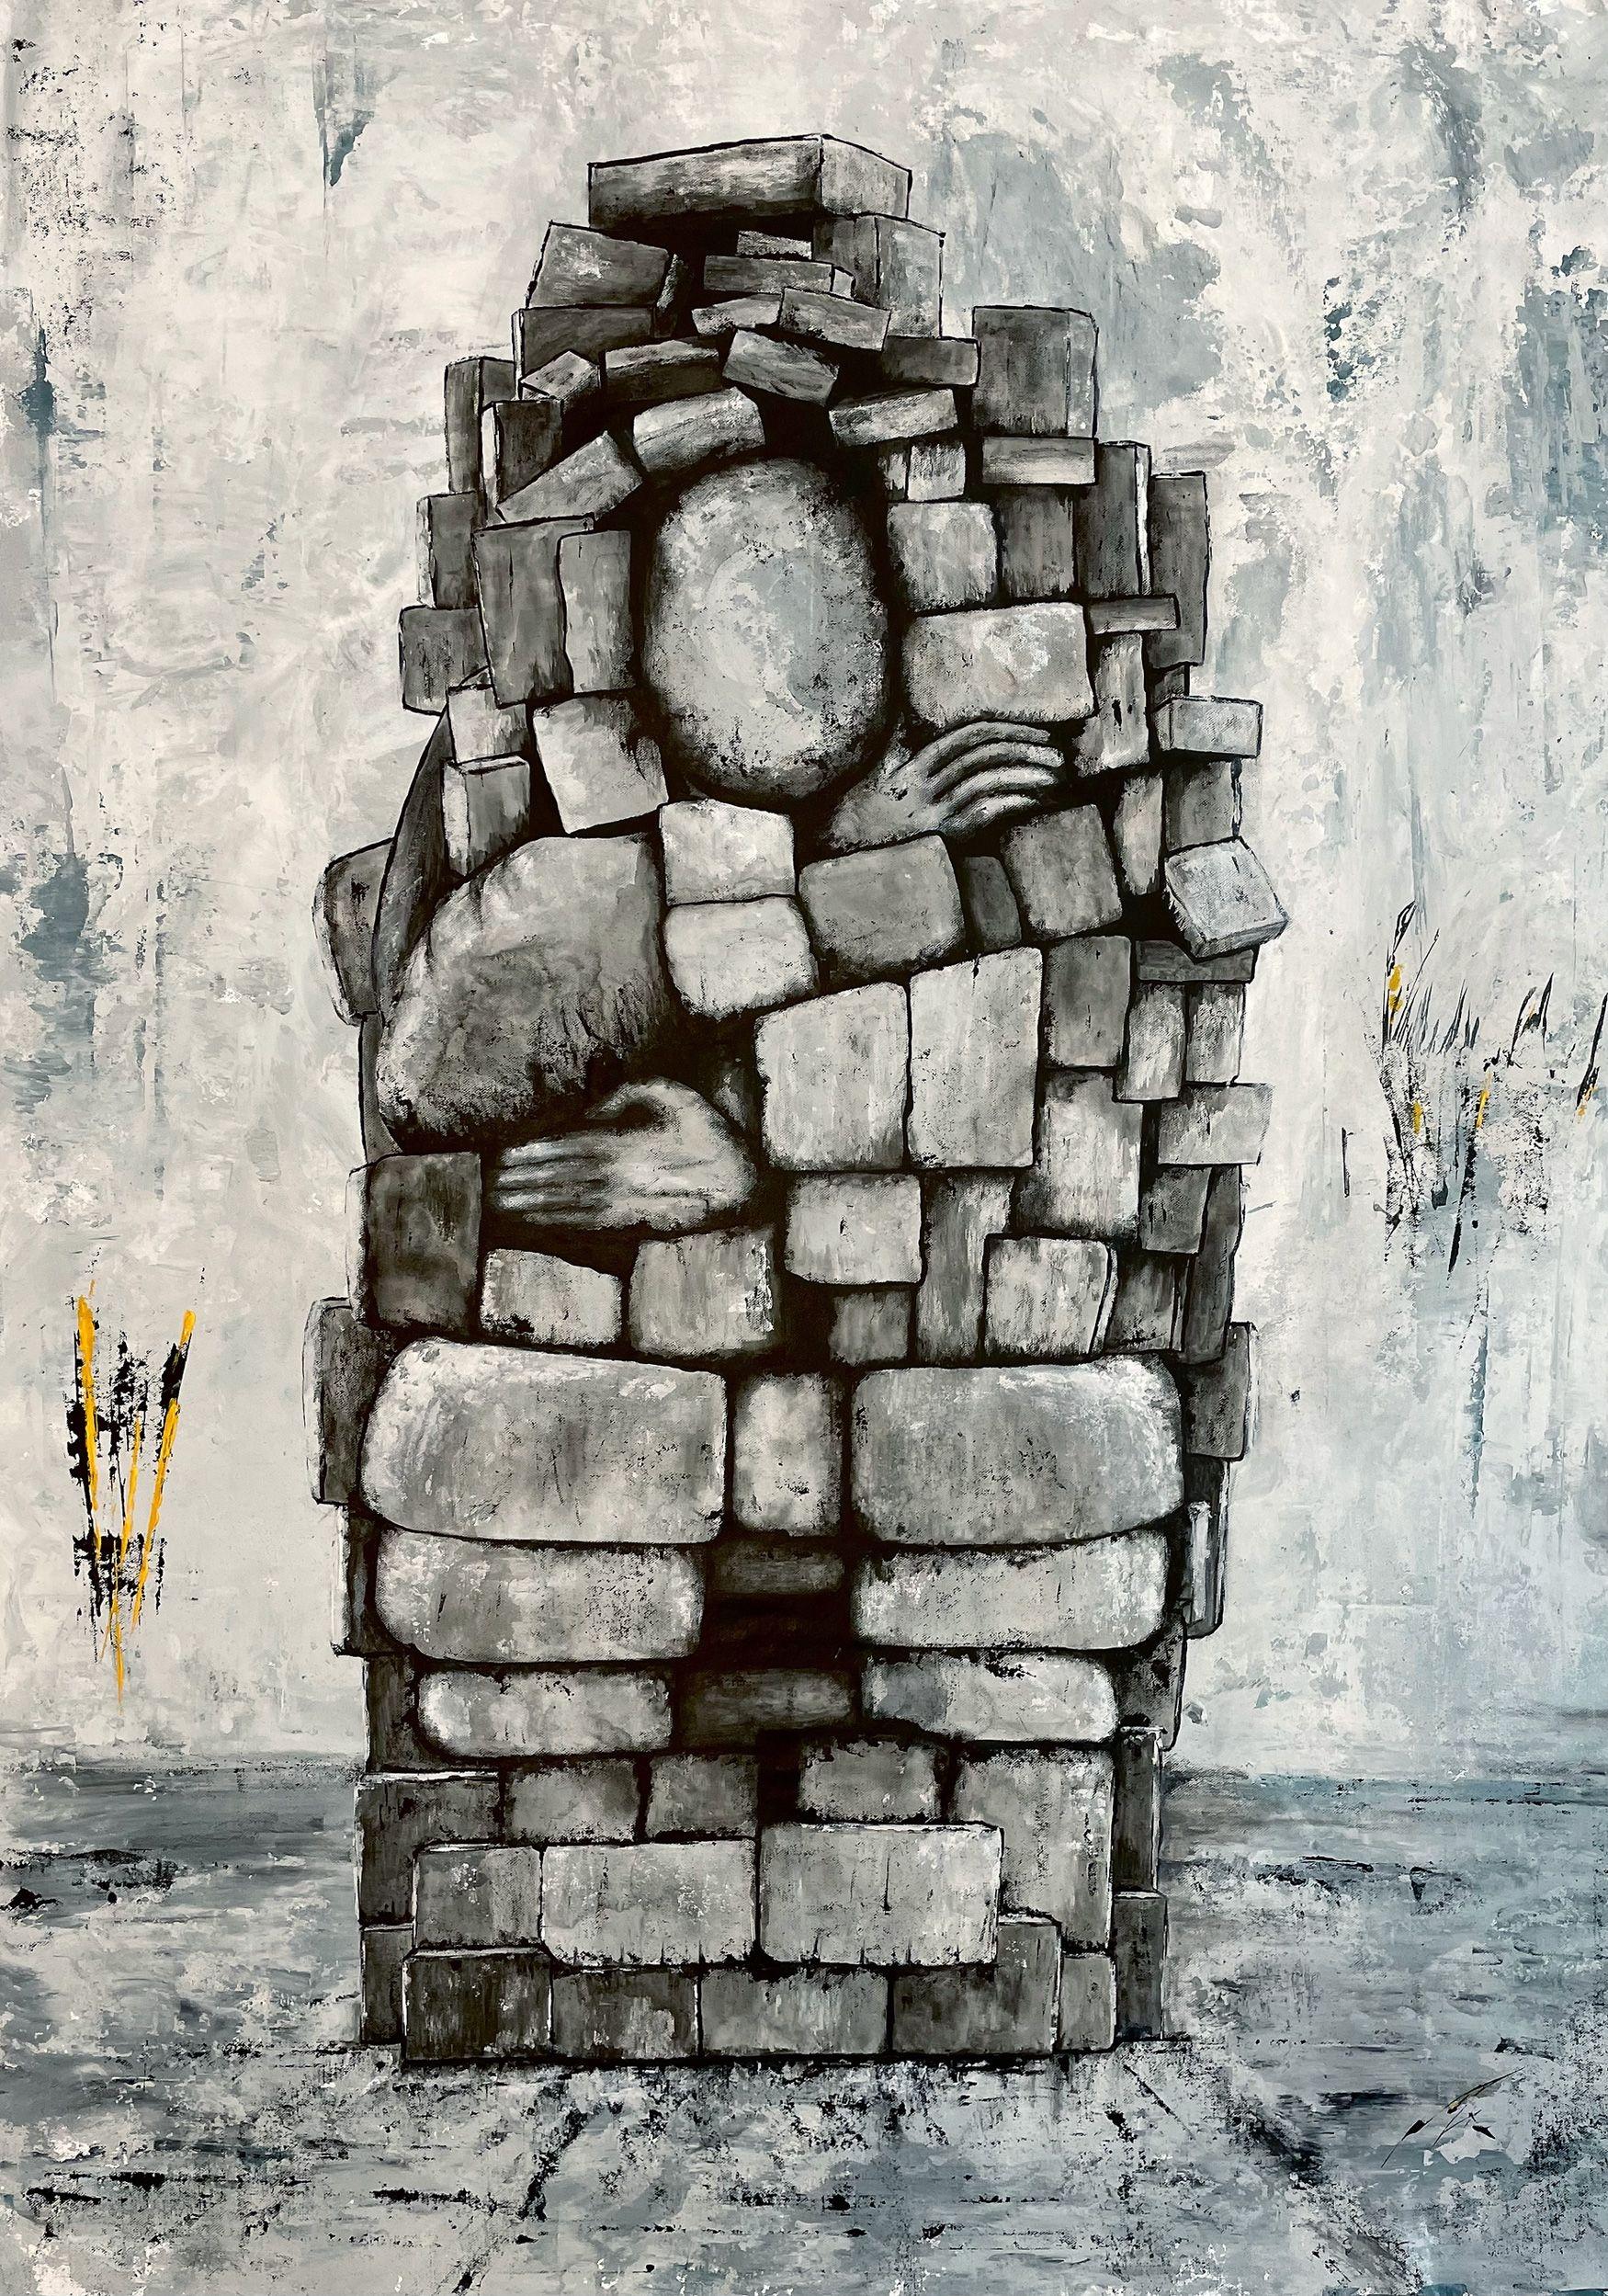 The Stuck is a depiction of a human stuck in his own thoughts. His thoughts are illustrated as bricks and stone blocks that buried him. His feet already hardened and became rocks grounding him down. The source of our problems seems to have roots